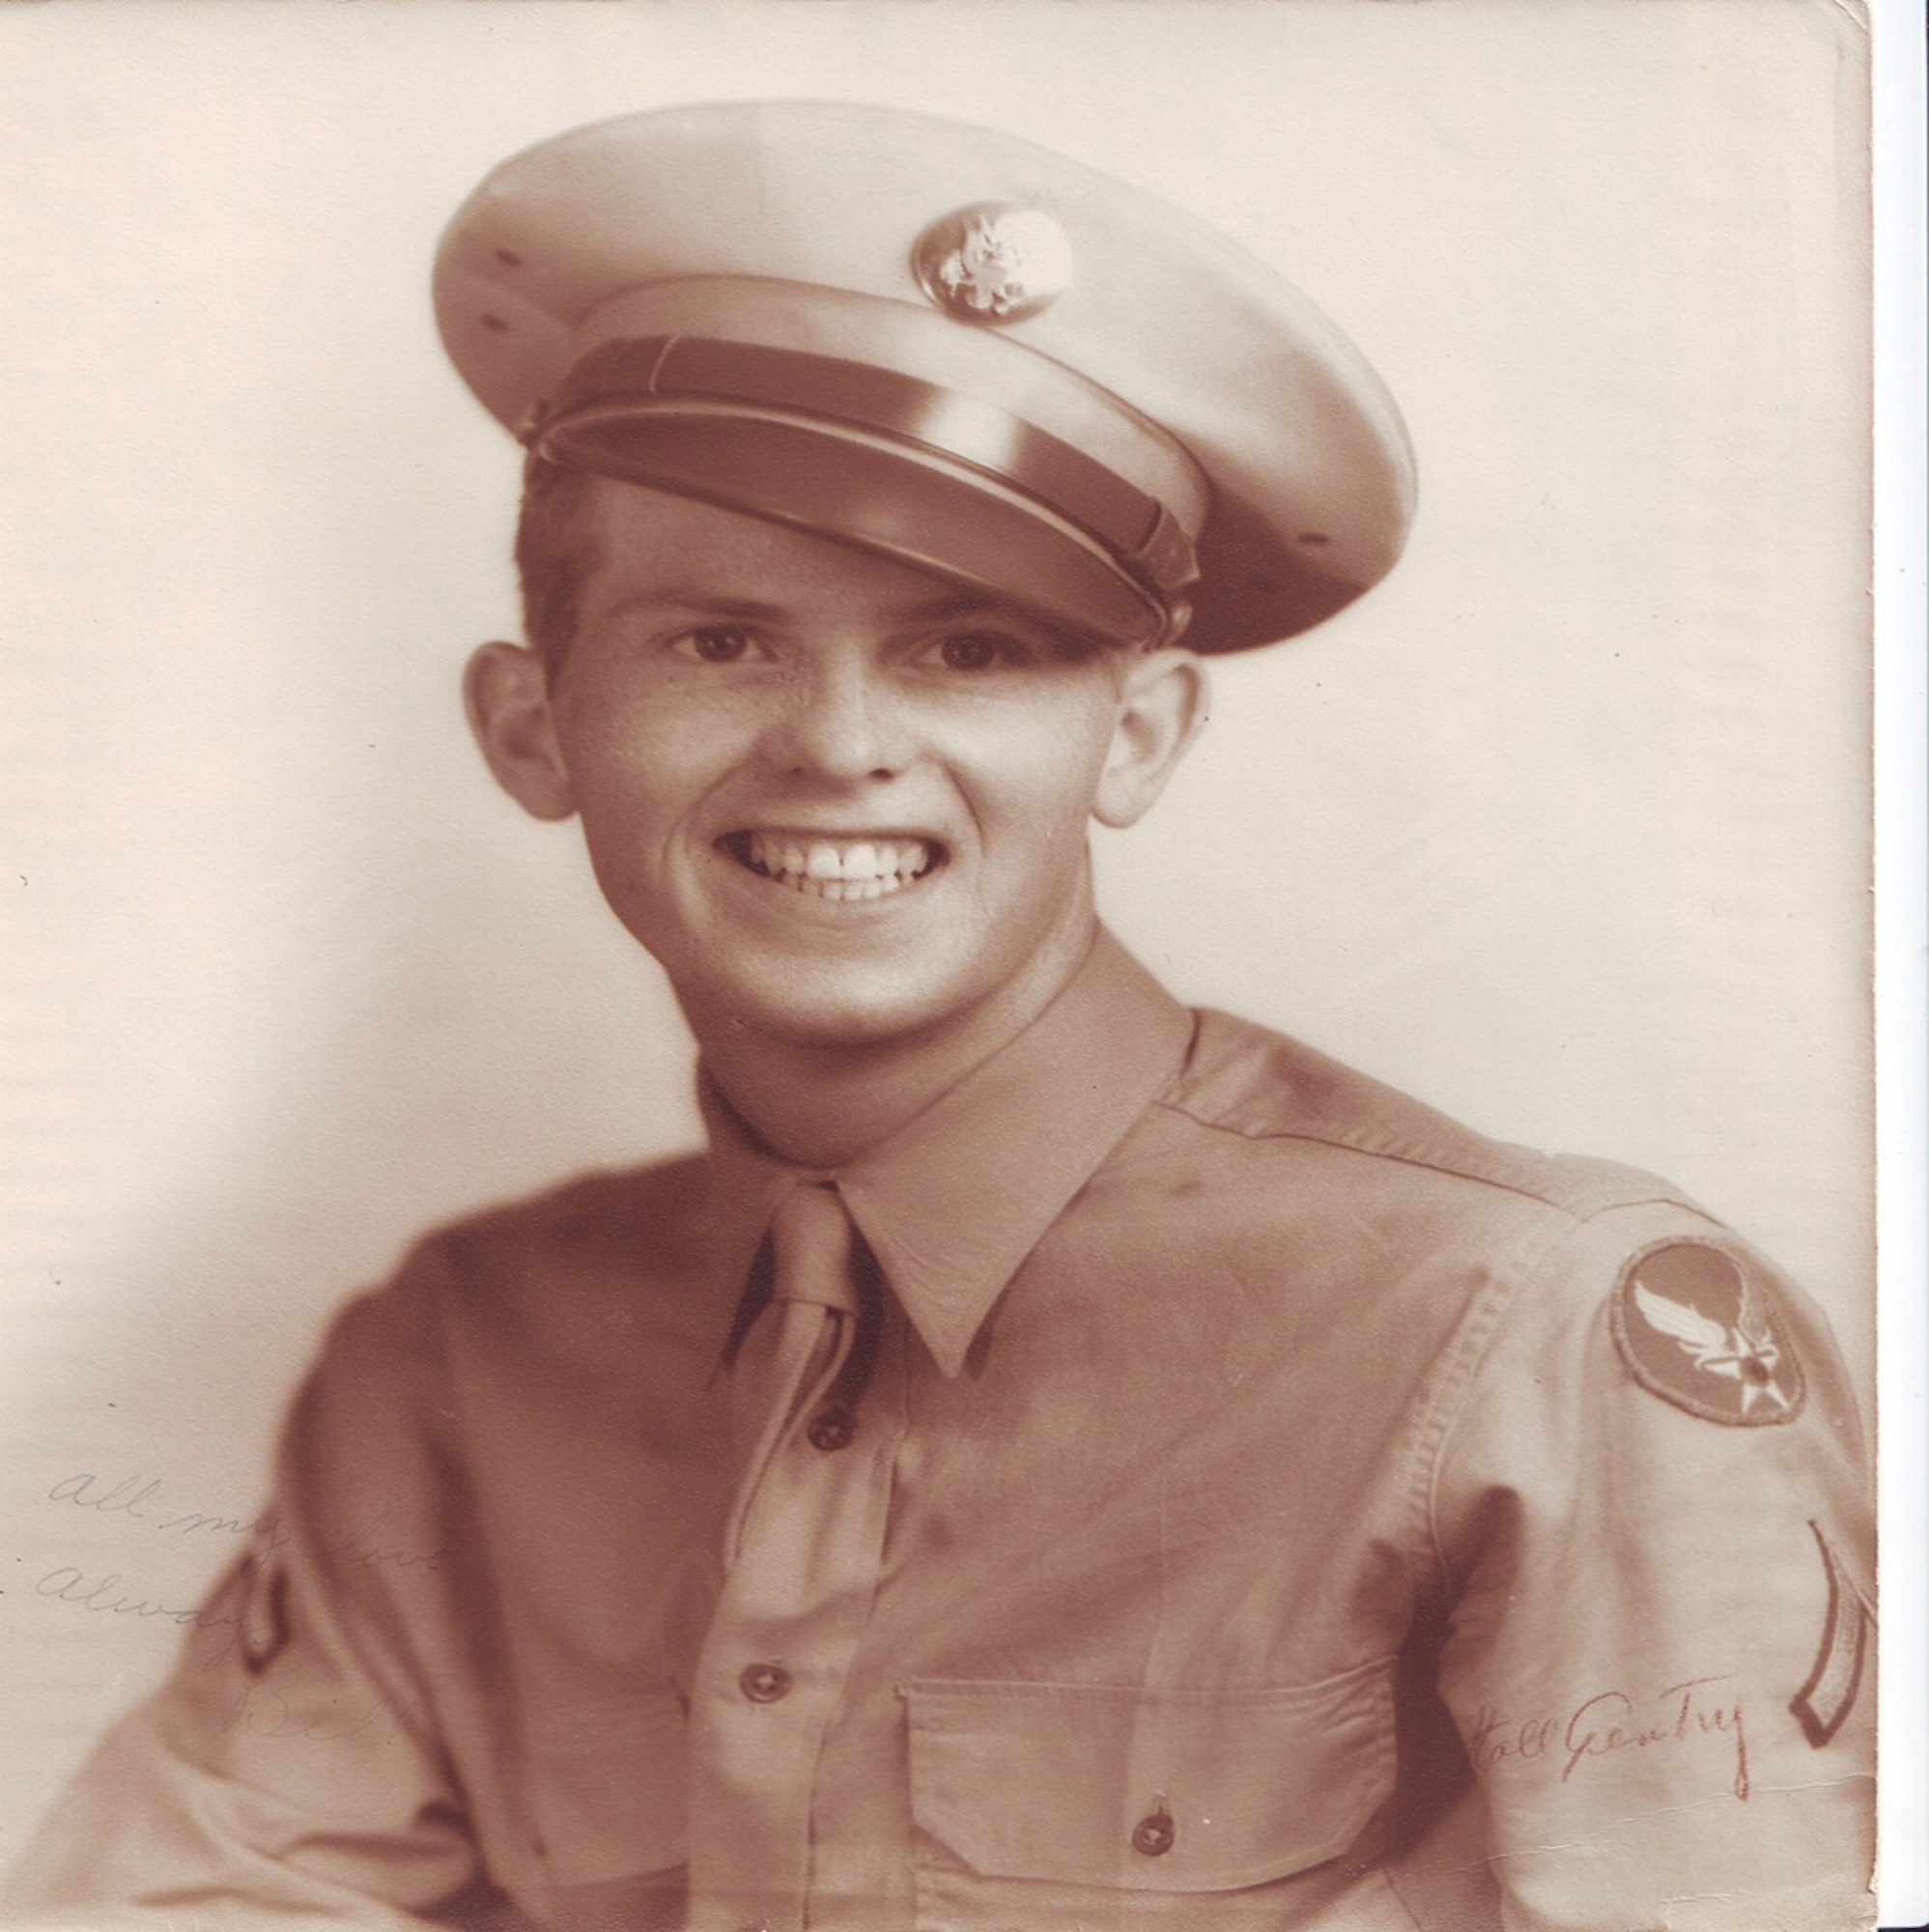 A historic photograph of Staff Sgt. (then Pvt.) Merl W. Skinner, 301st Squadron, U.S. Army Air Forces, in his service uniform. Skinner, a C-47 Skytrain crewchief, died while air evacuating World War II patients to Prestwick, Scotland, and is buried at Madingley American Cemetery in Cambridge, England. (Courtesy photo)